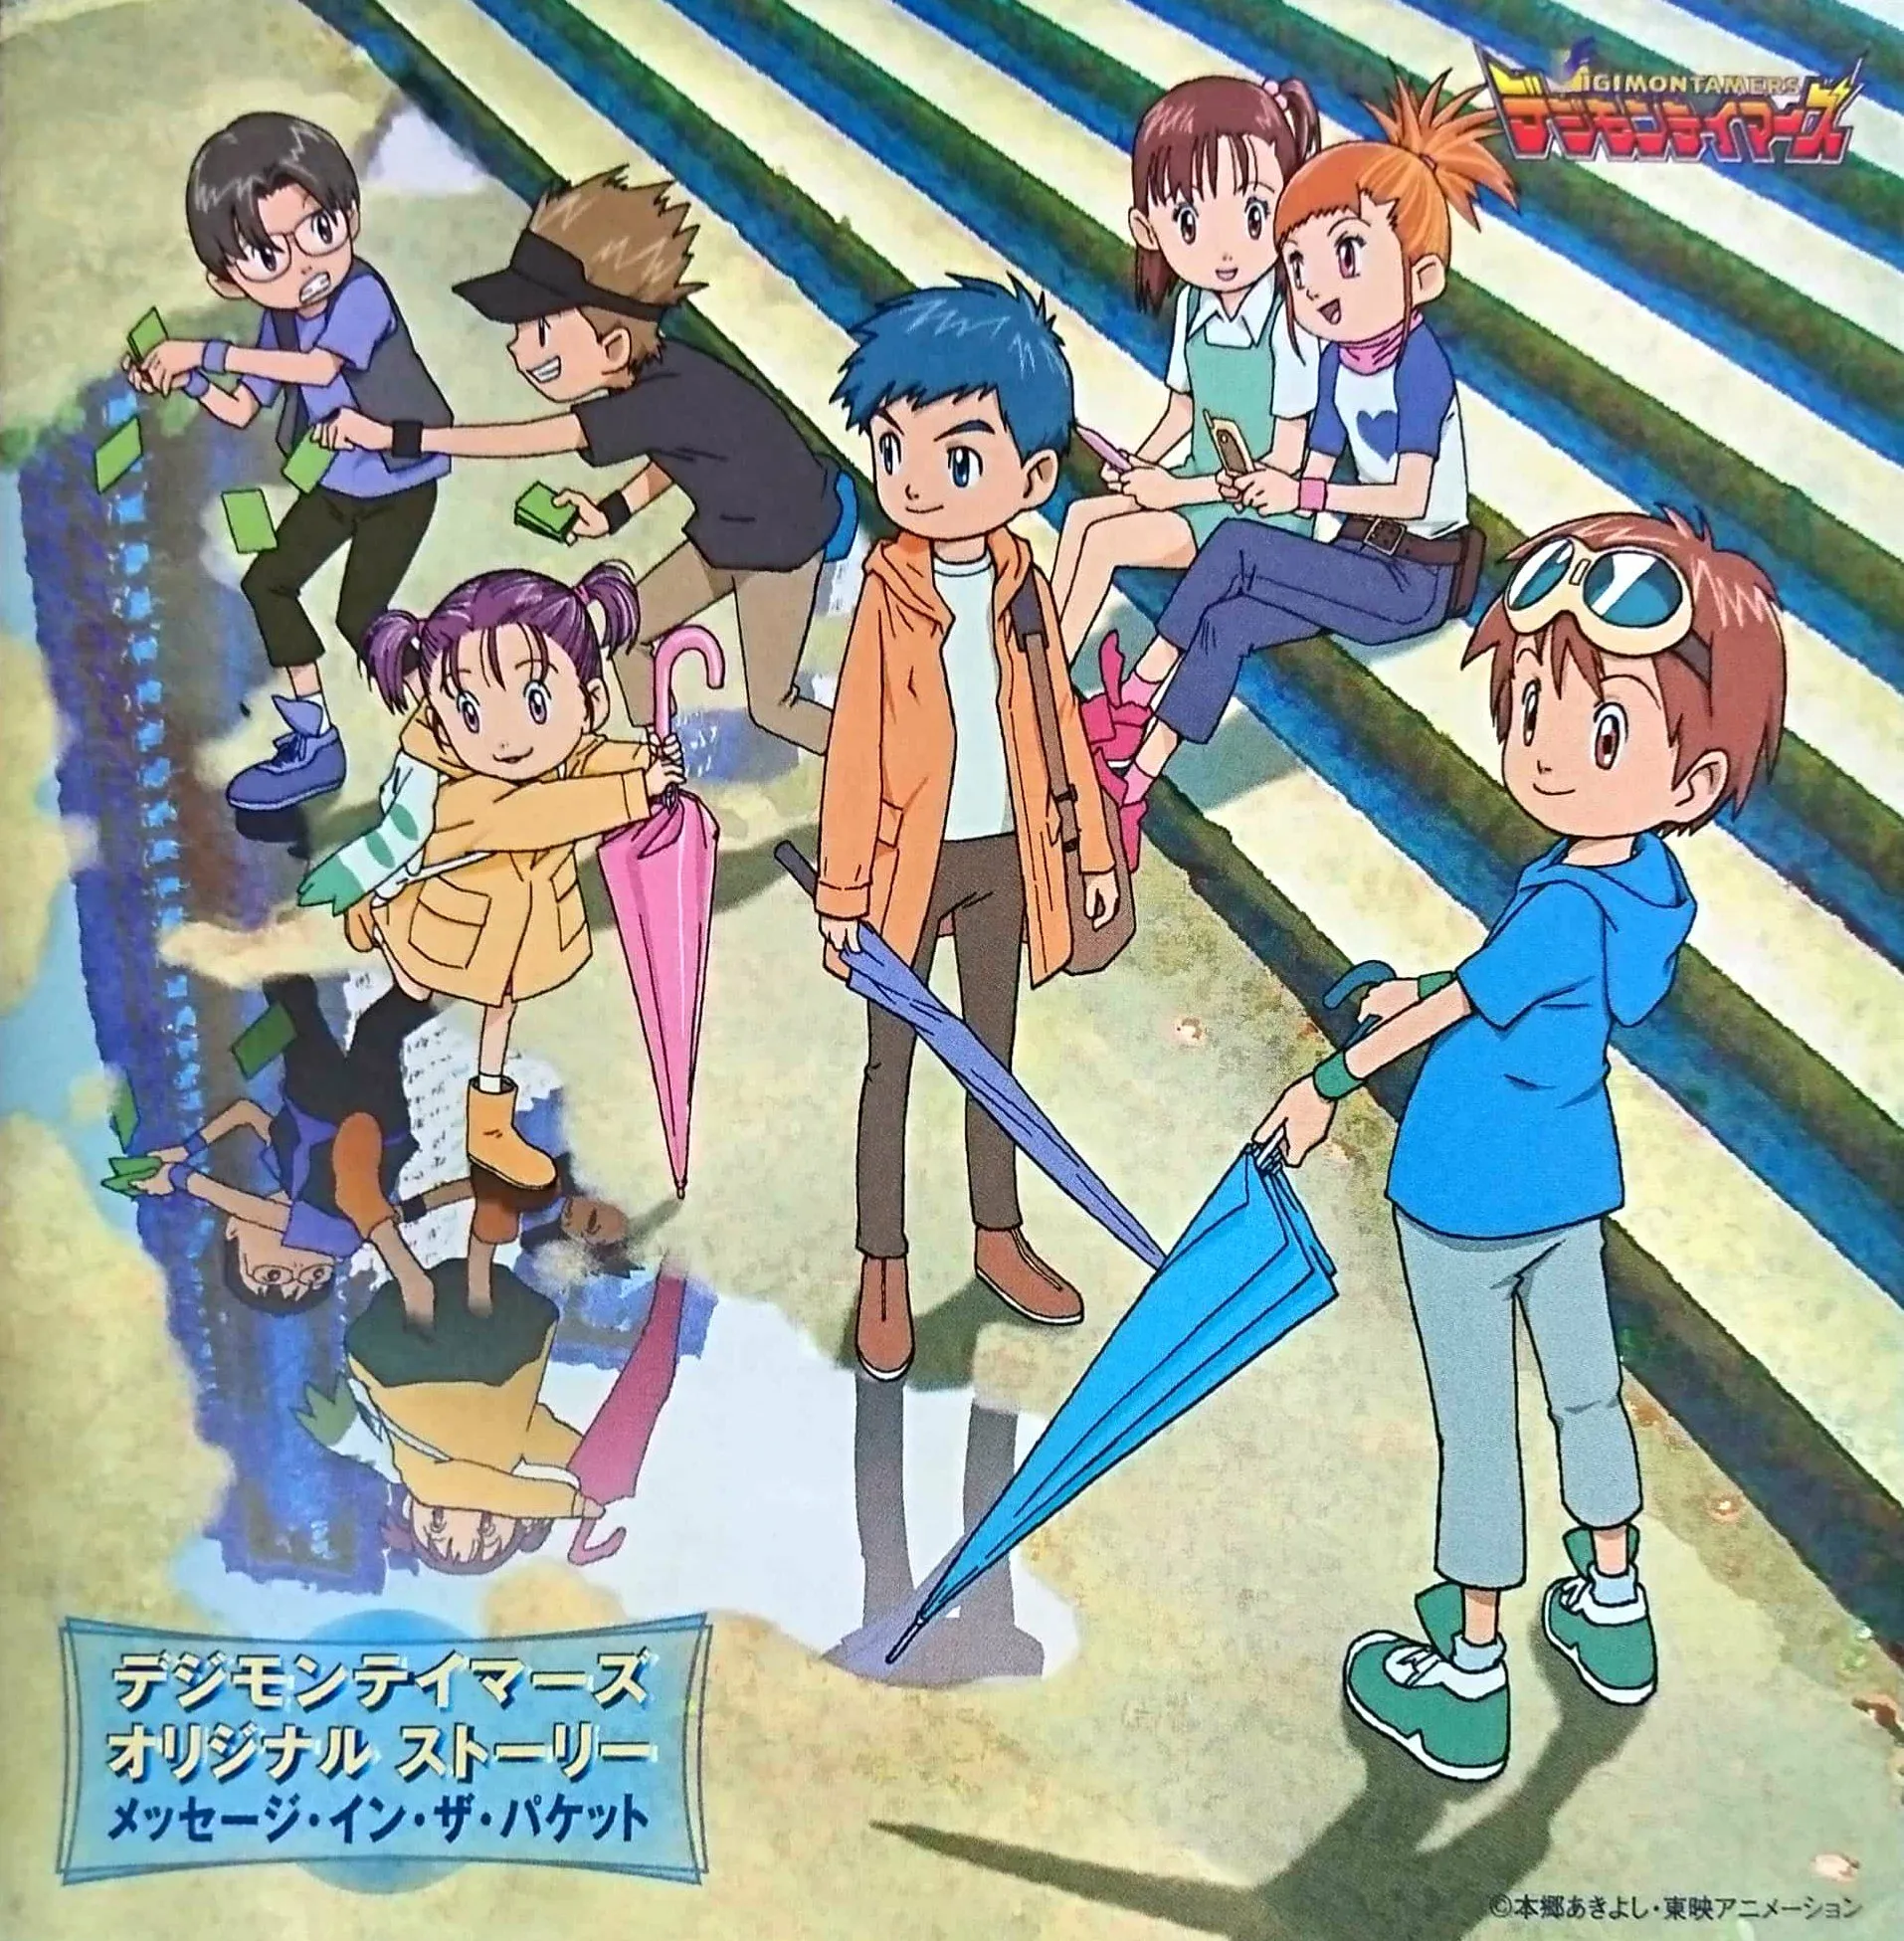 Digimon Tamers Original Story Message in the Packet